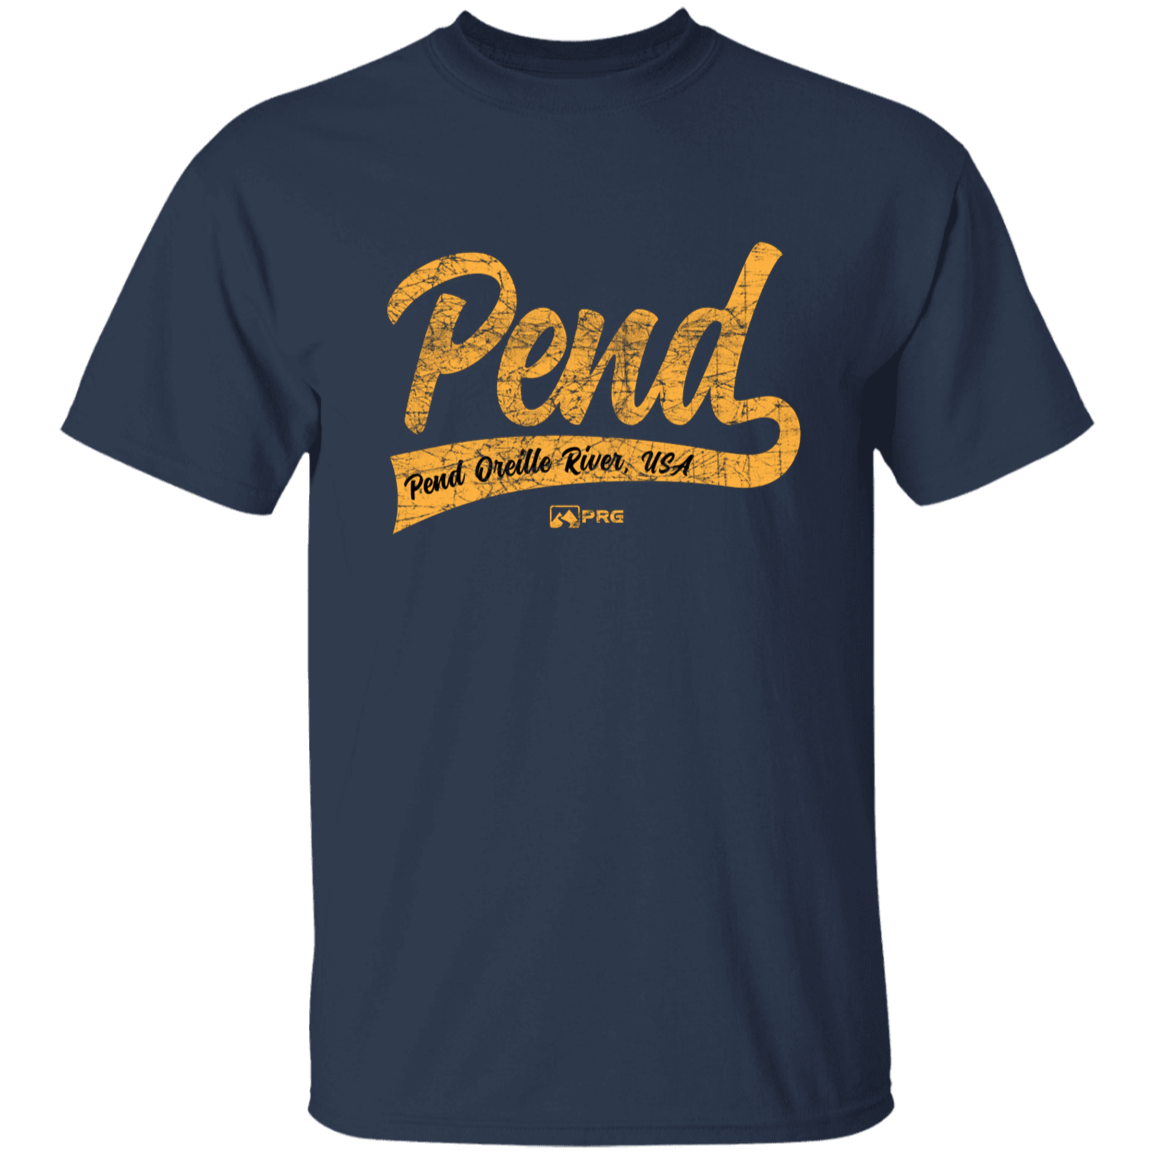 Pend for the Pennant - Youth Shirt